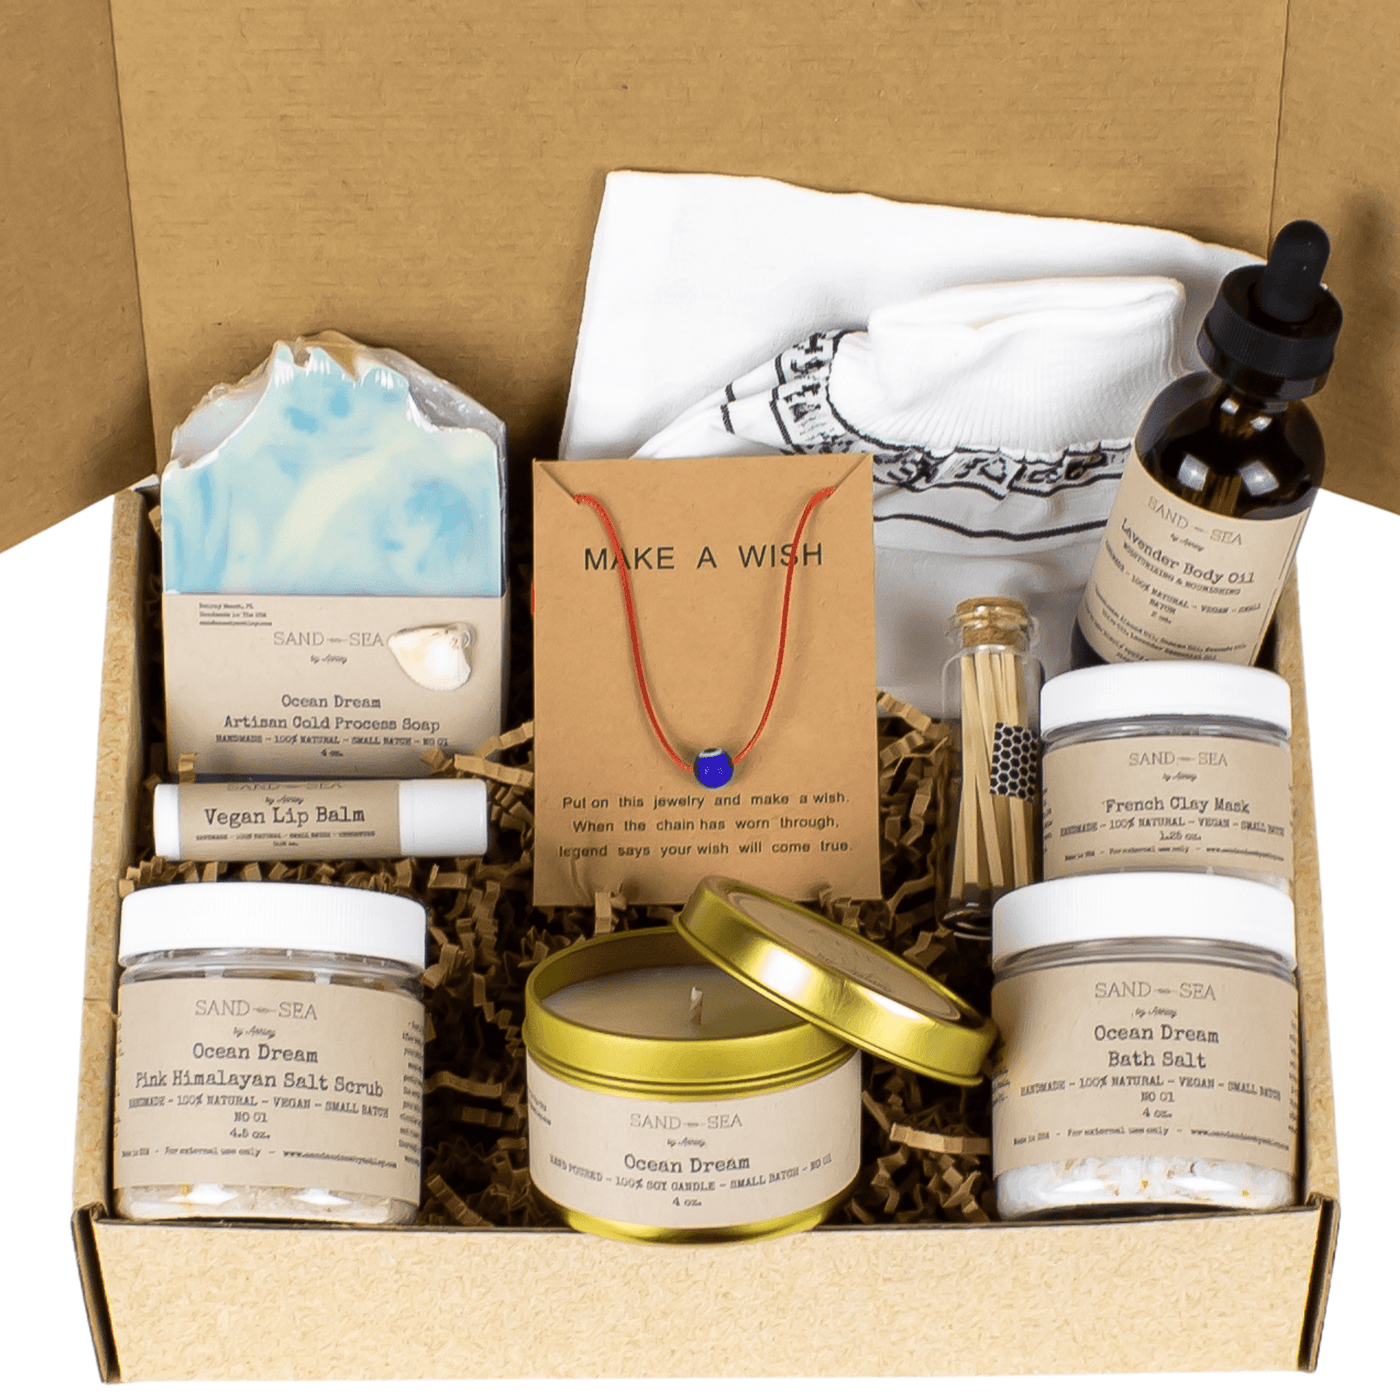 Mother's Day Spa Gifts from Daughter – Sand & Sea by Ashley